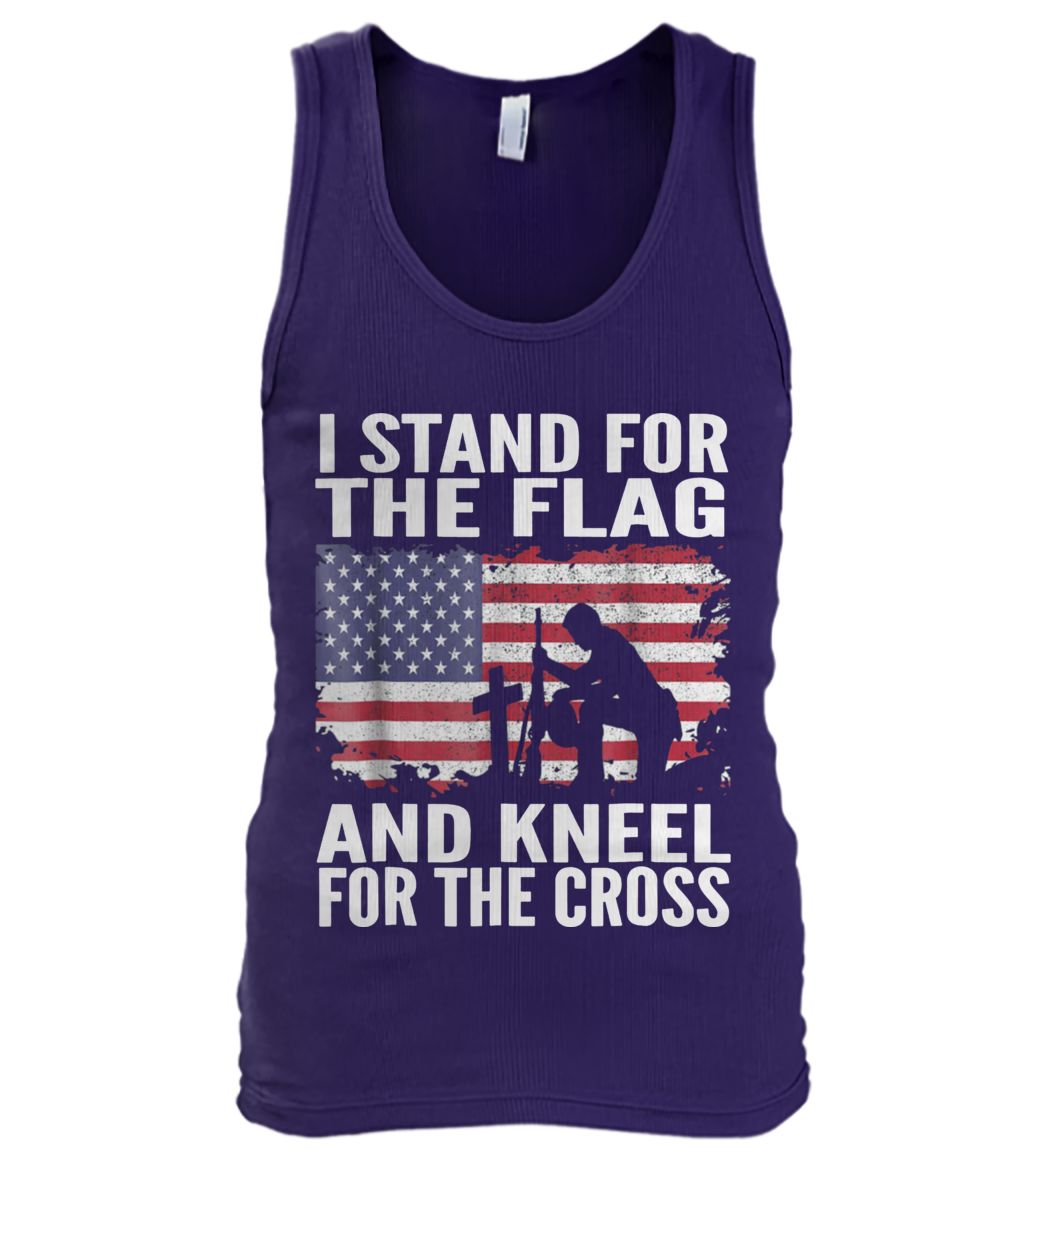 I stand for the flag I kneel for the cross patriotic military men's tank top